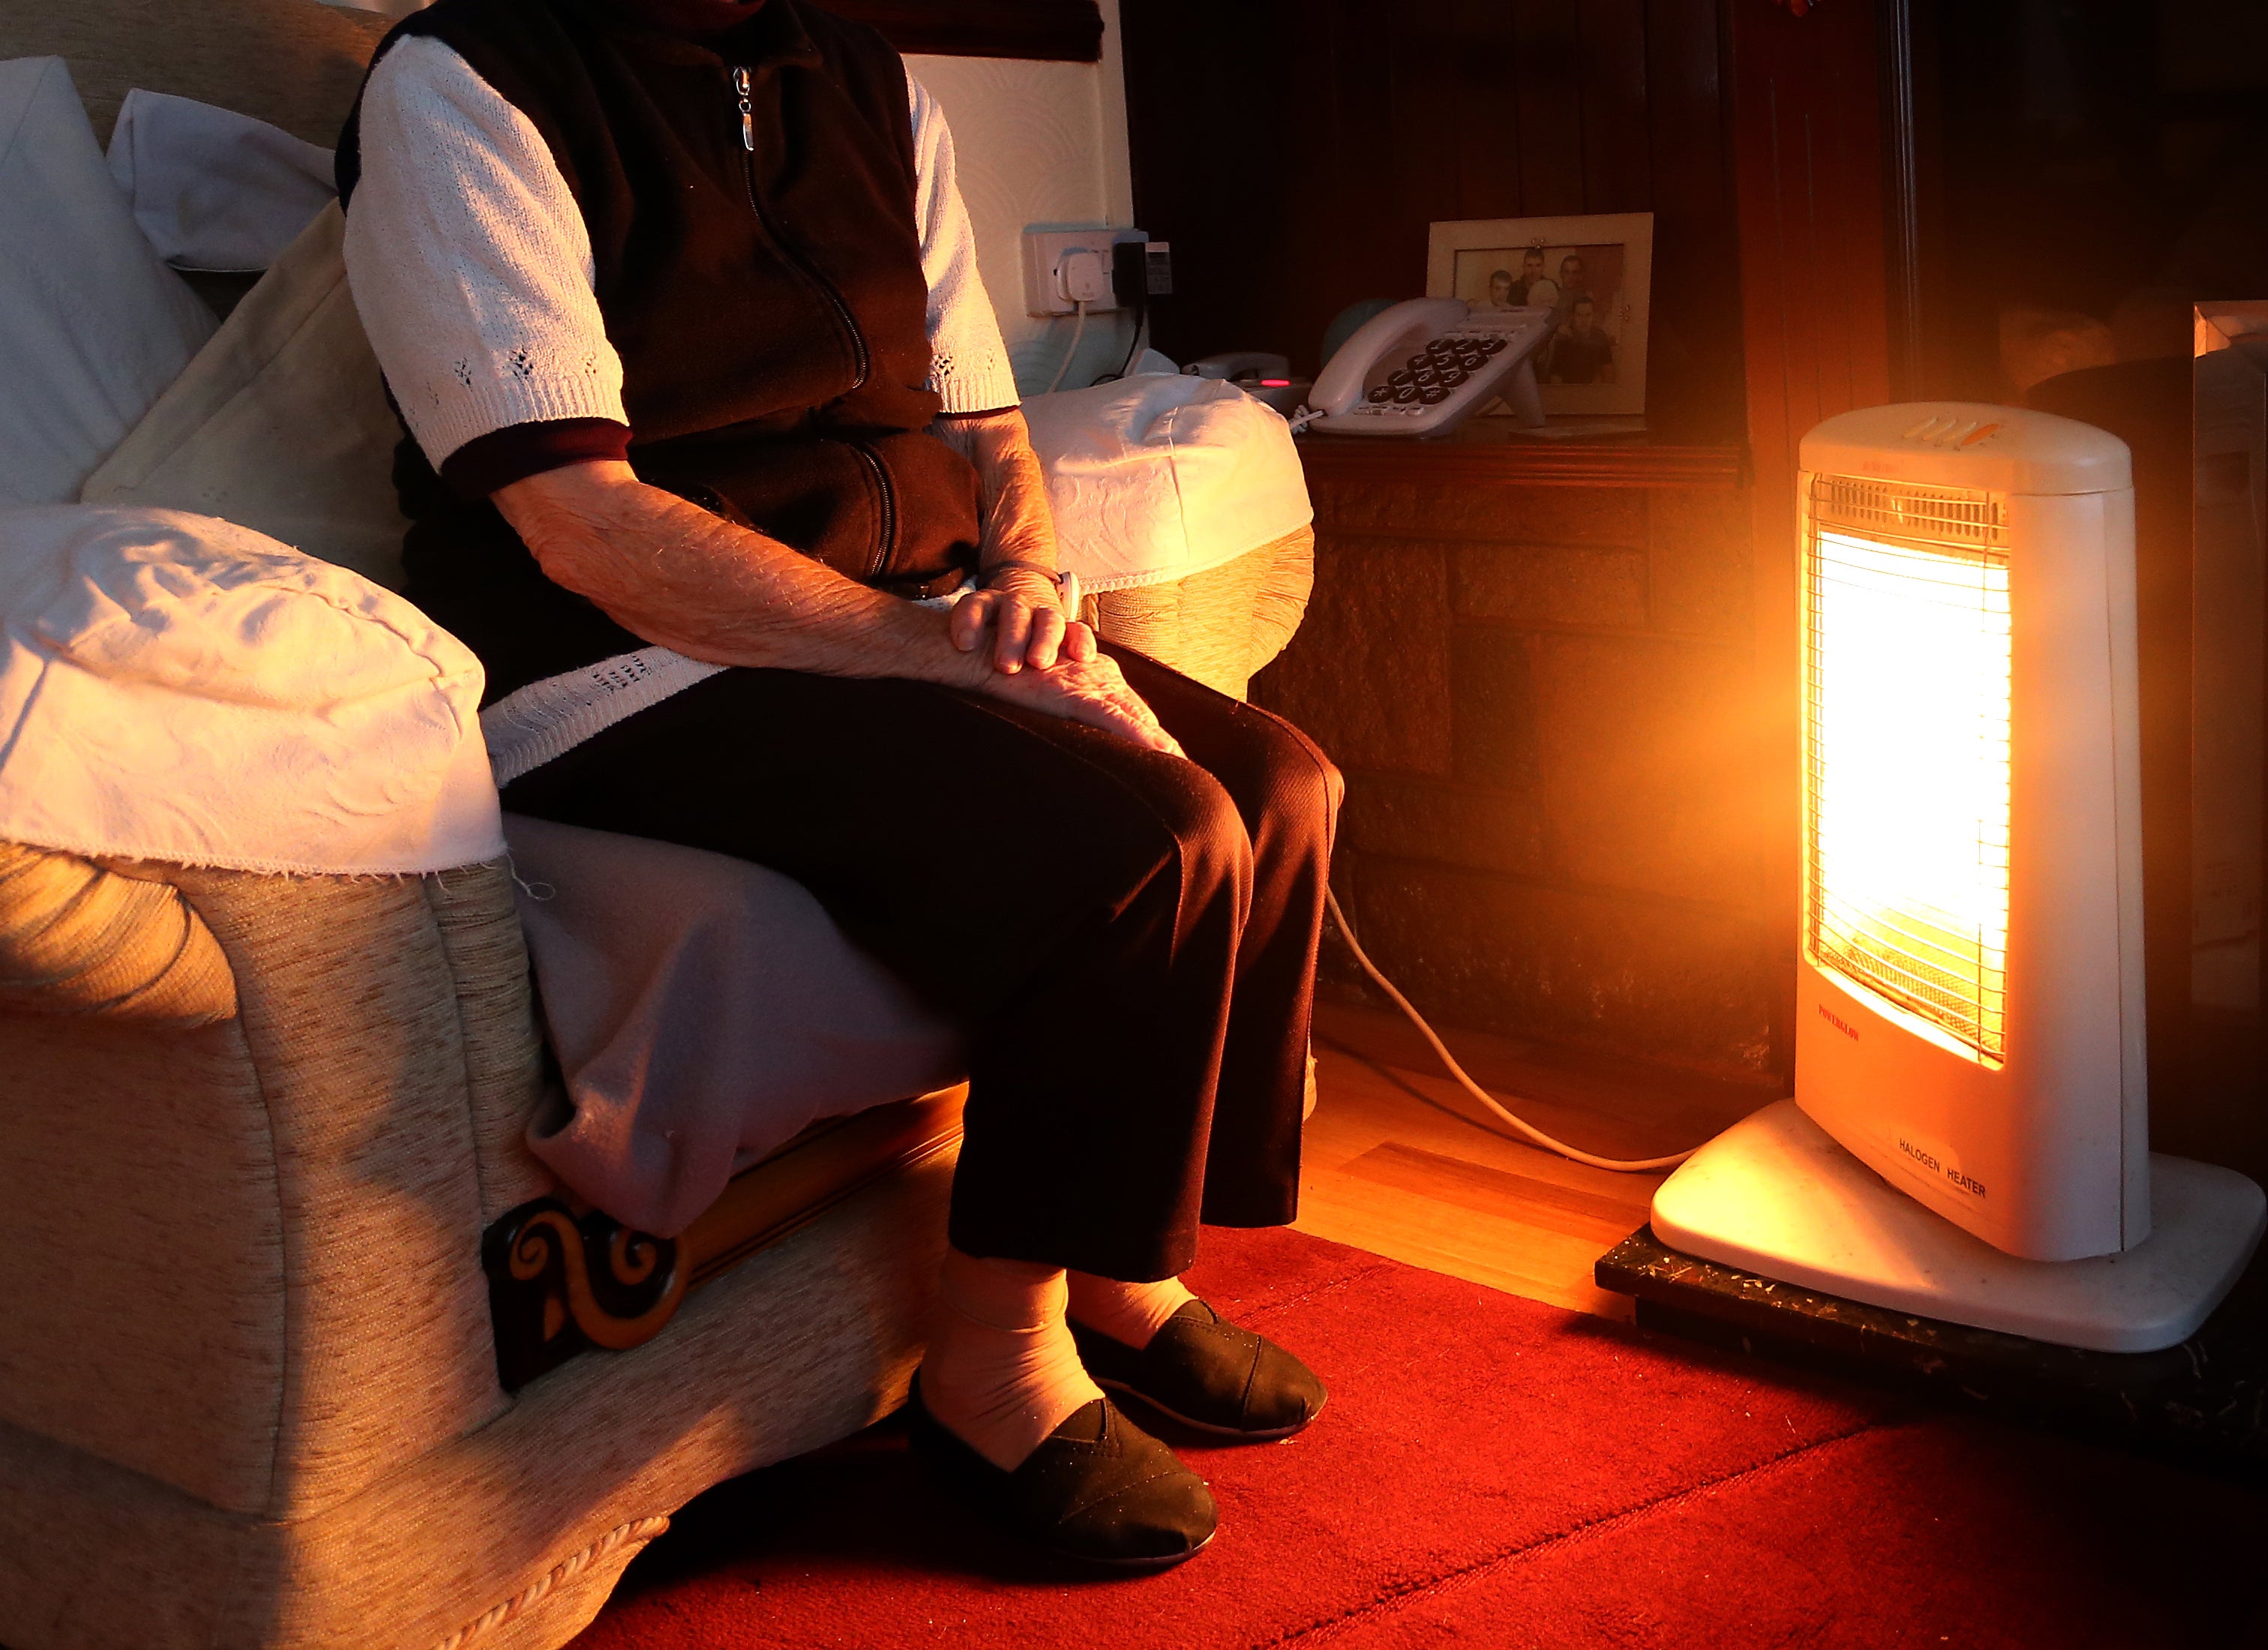 More people over 65 are said to be worried about paying their energy bills compared to last month